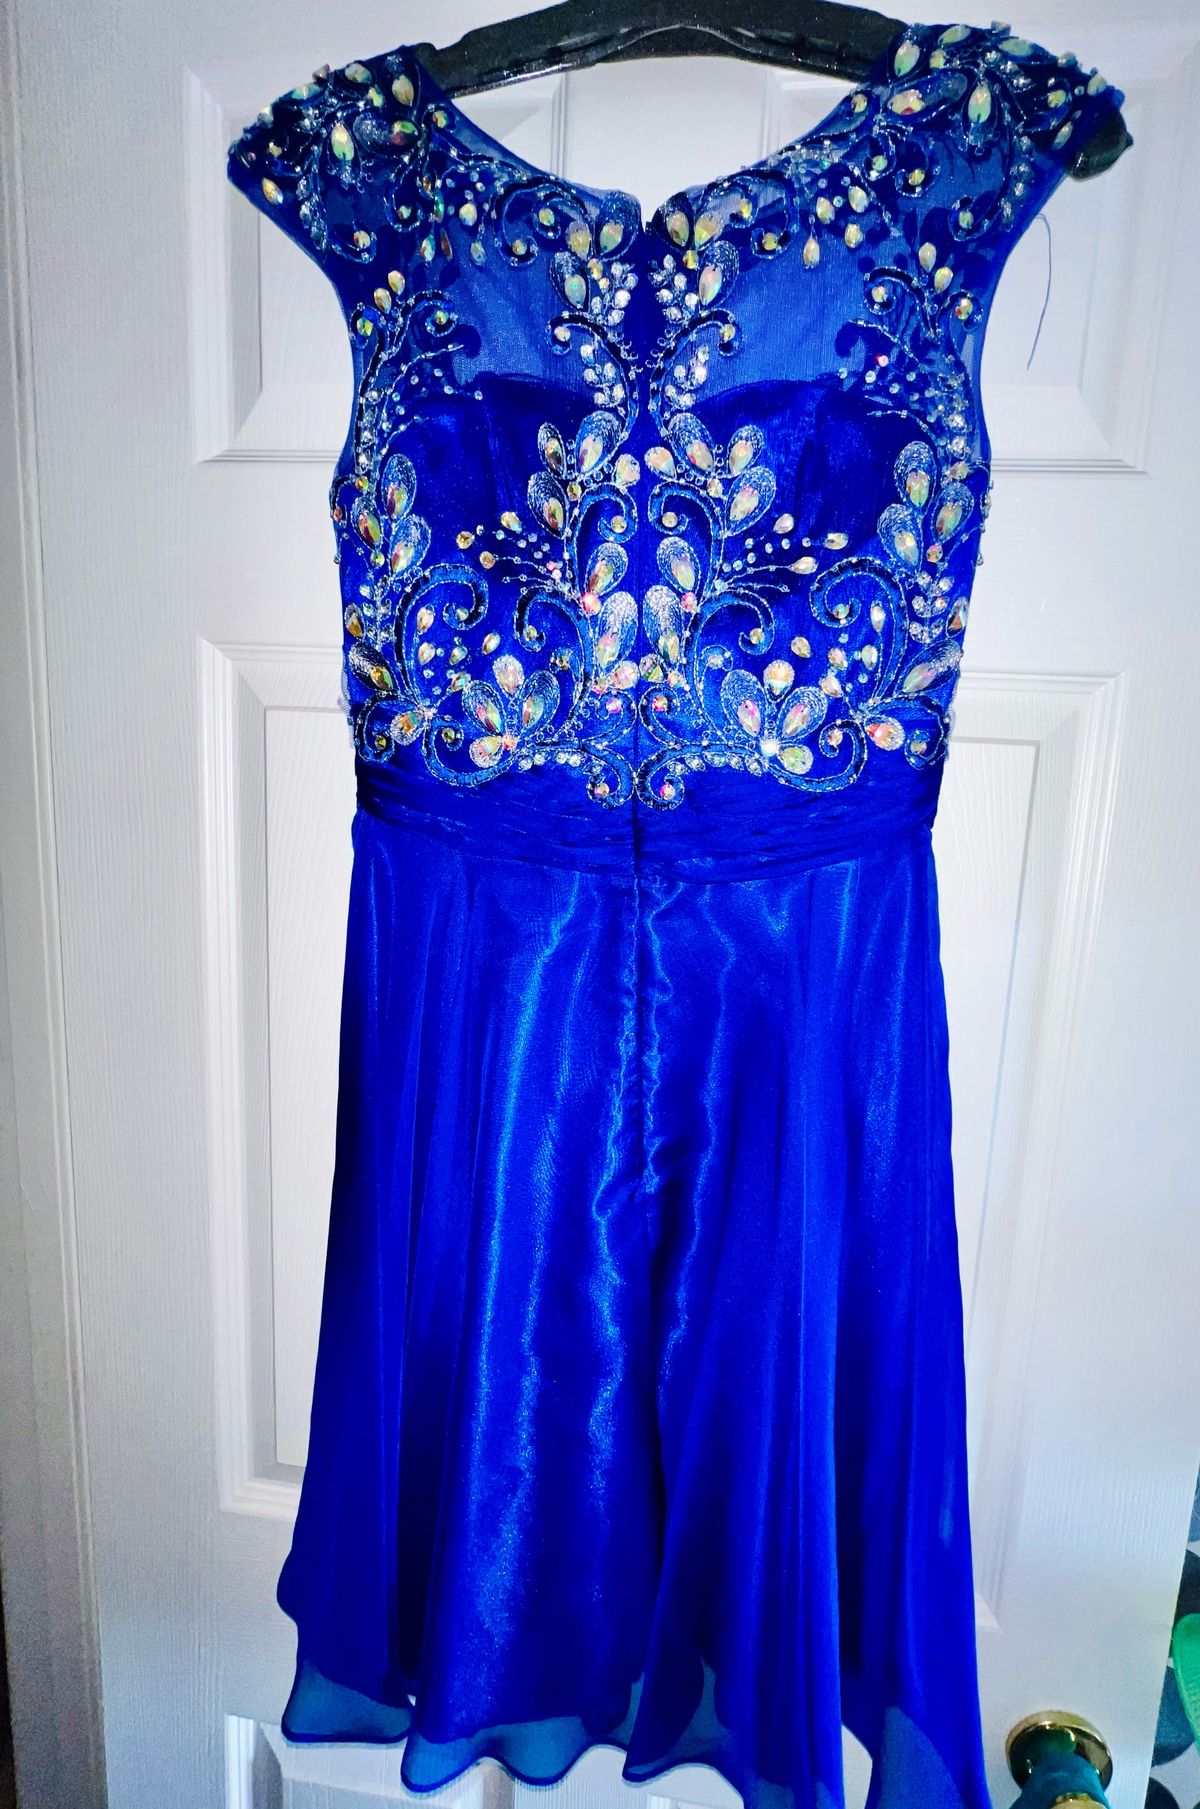 Hannah S Size 4 Homecoming Sequined Blue Cocktail Dress on Queenly